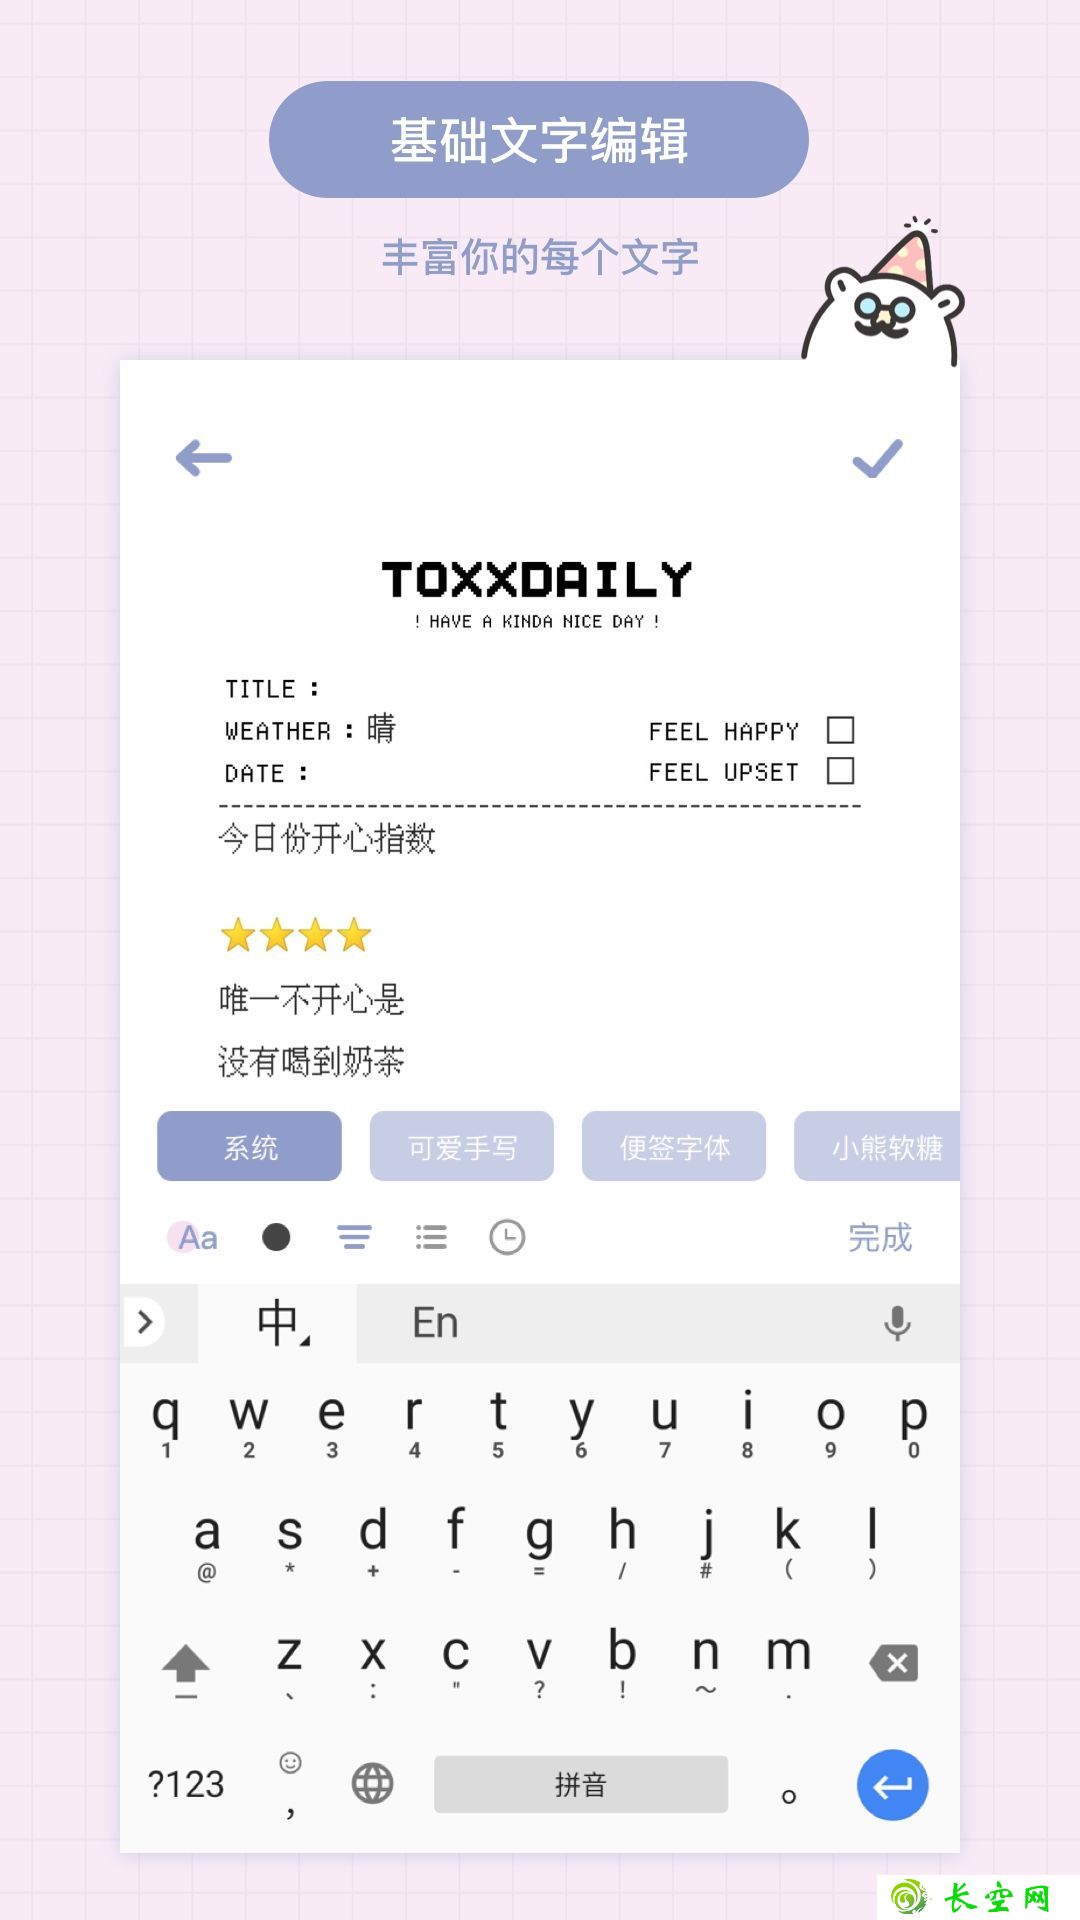 toxx便签